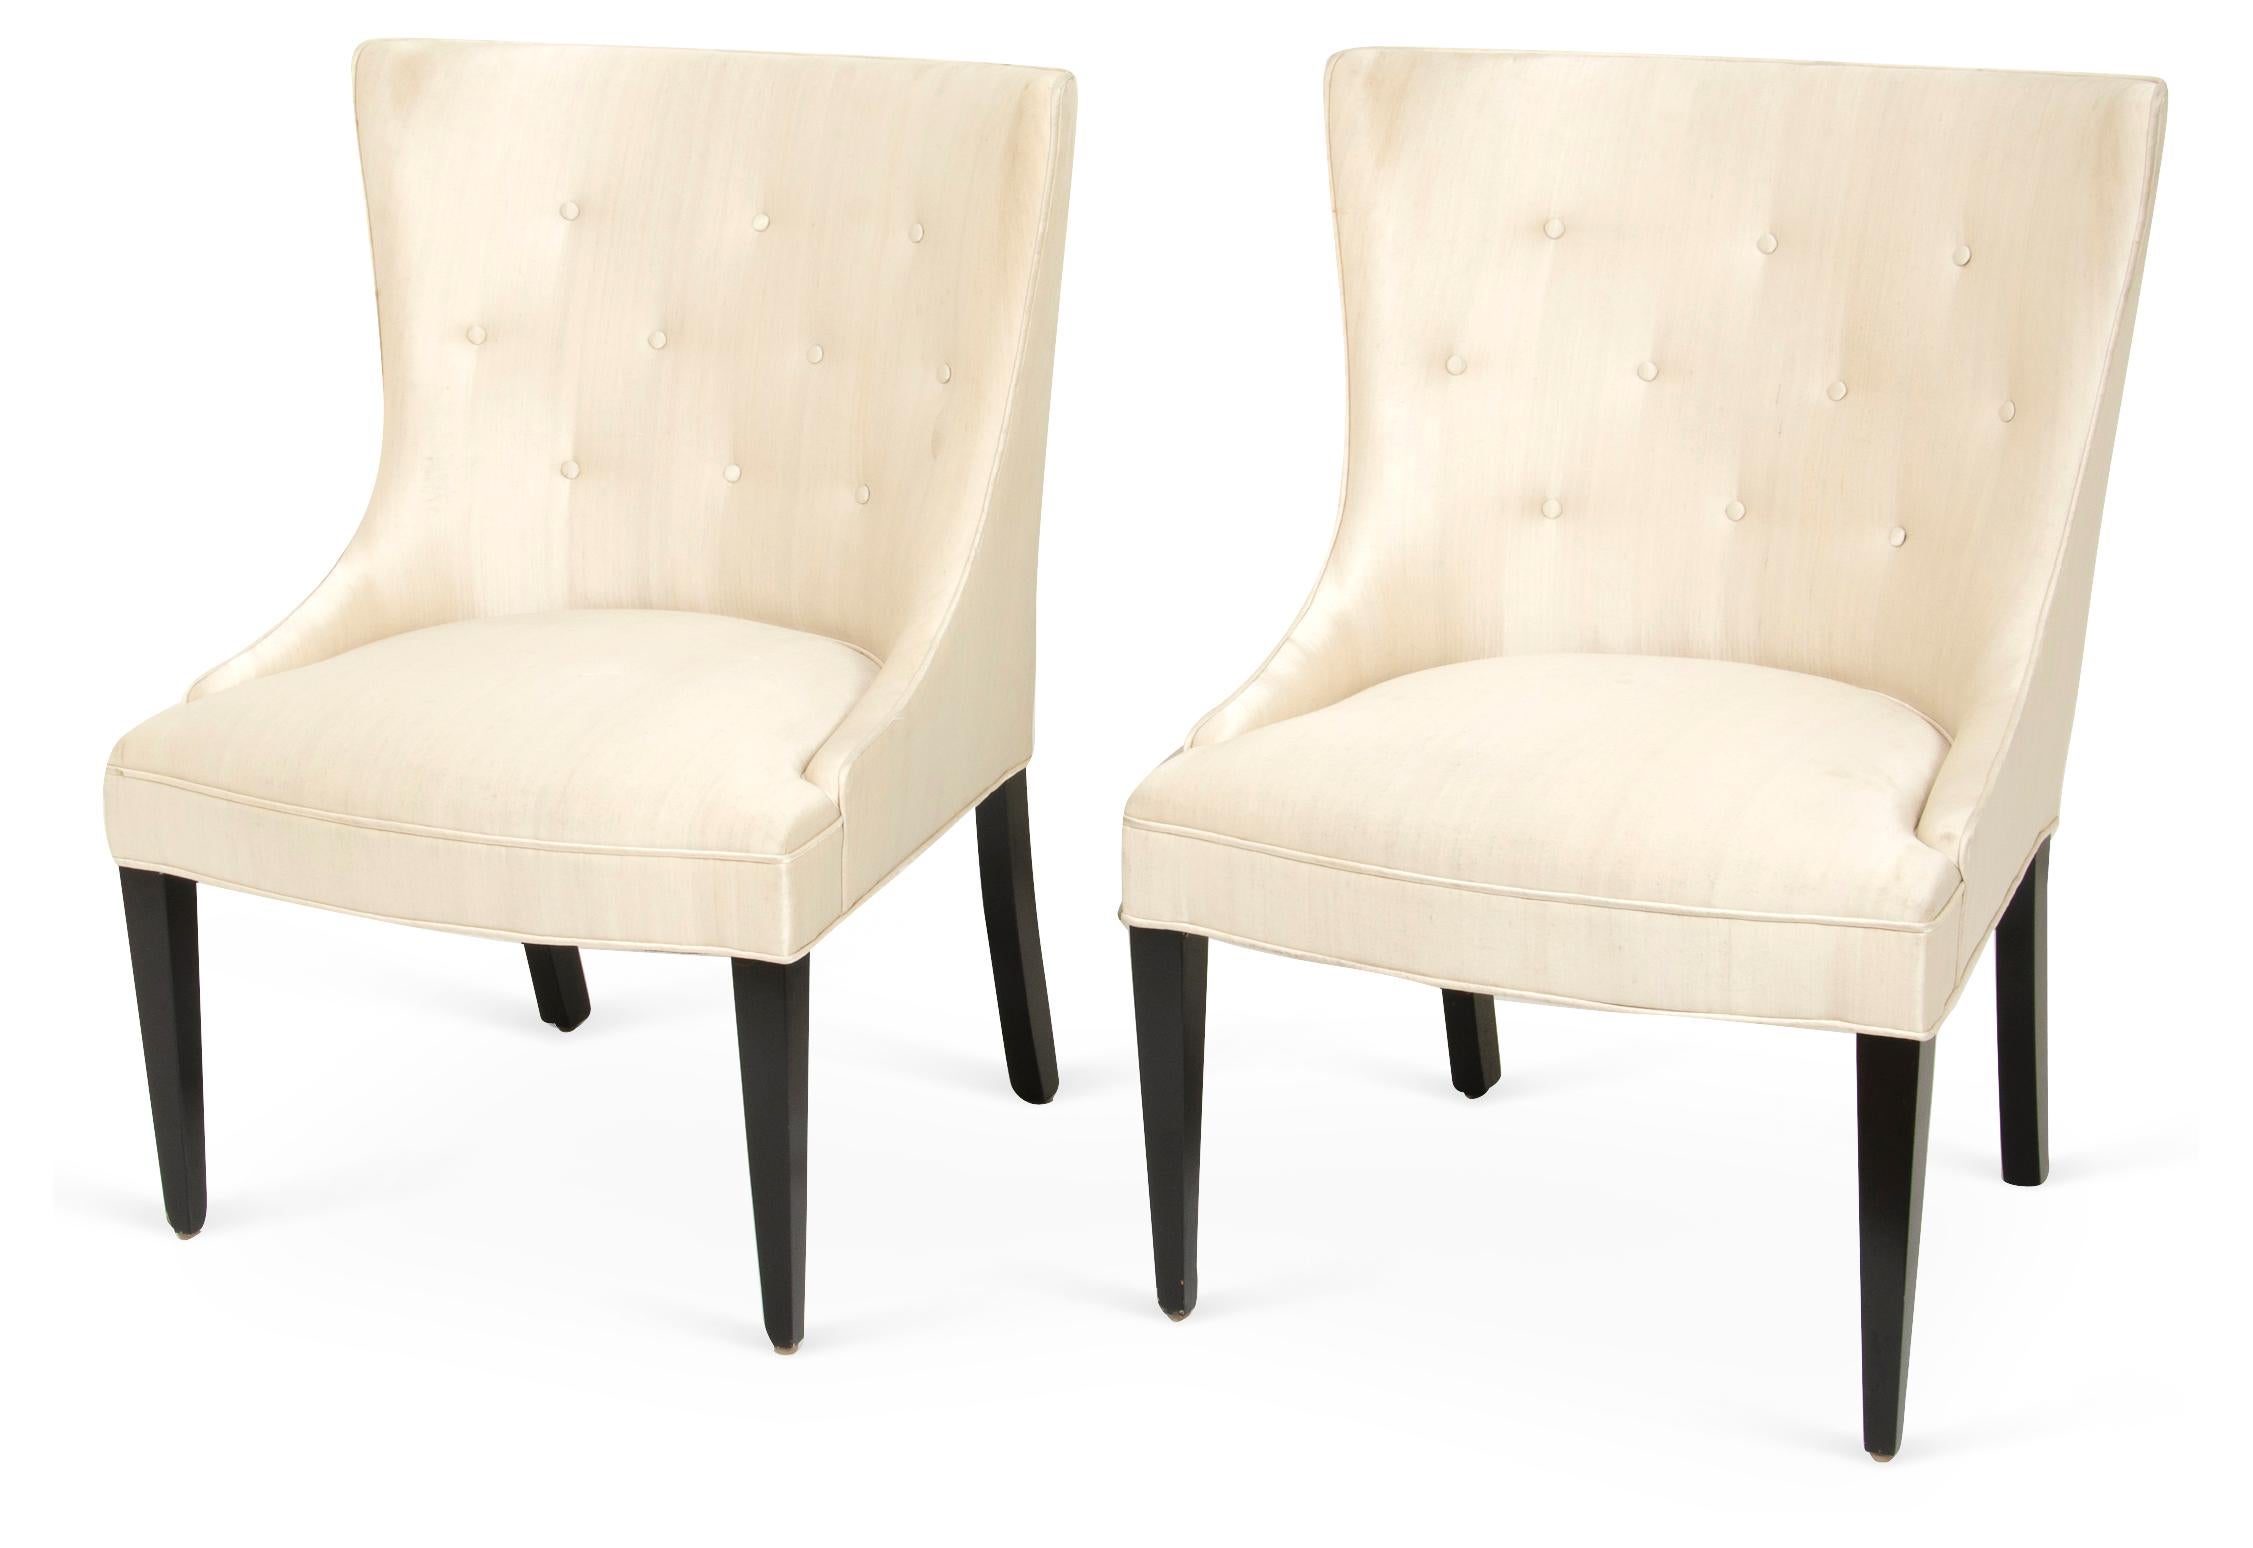 Contemporary Pair of  Chairs and matching Ottoman,  Iconic Duchesse Brisee For Sale